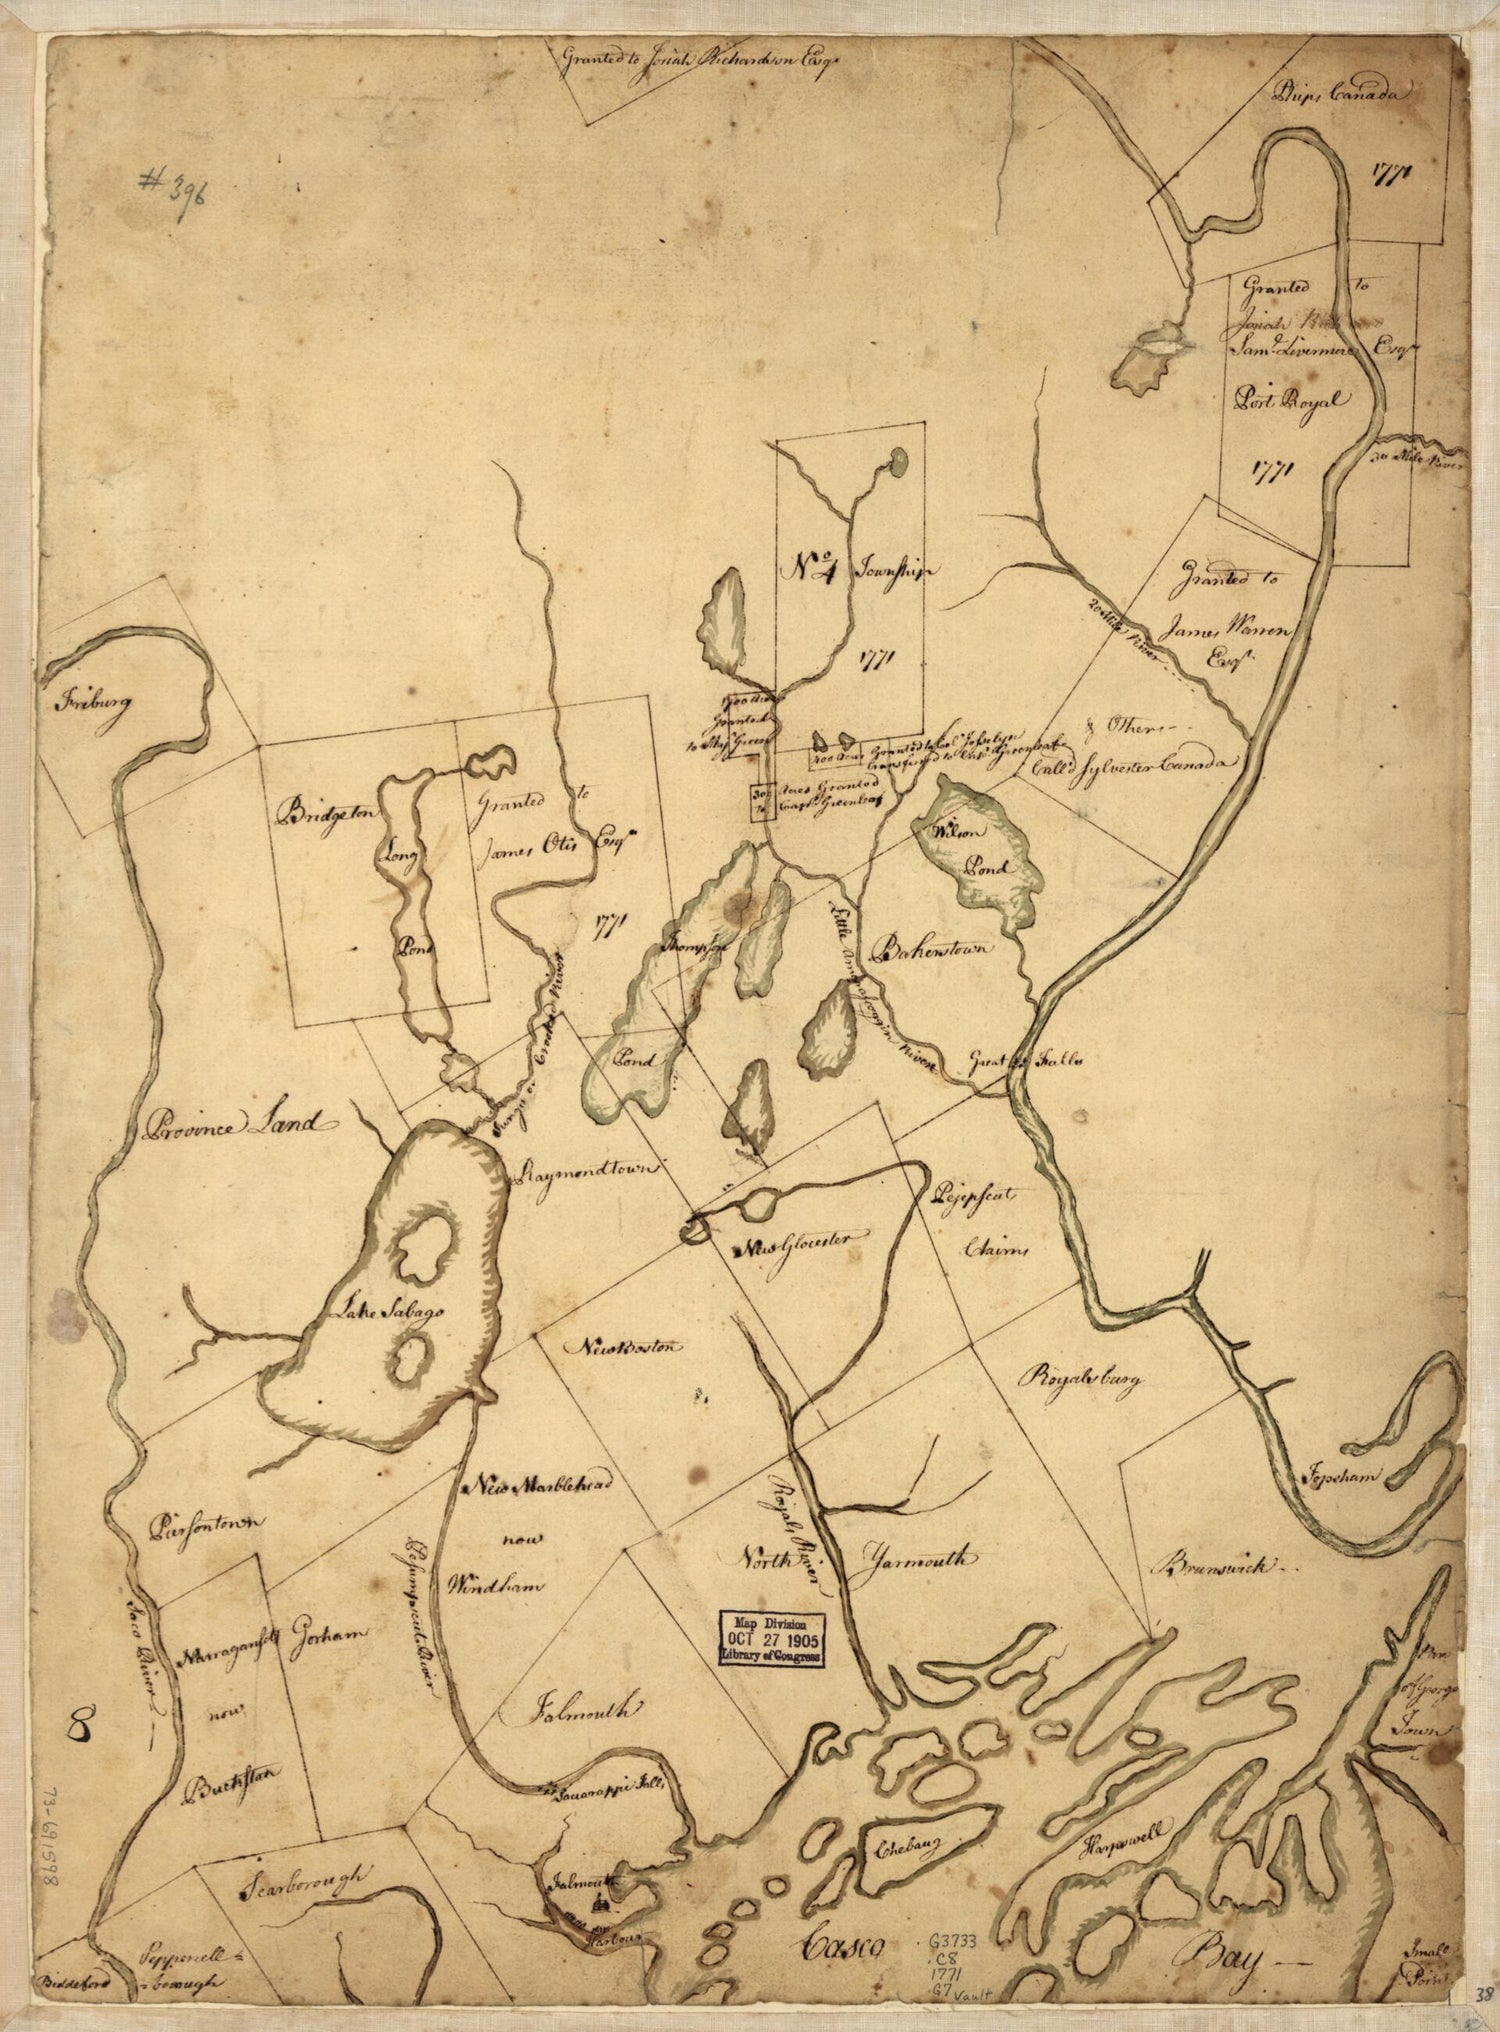 This old map of Part of Oxford and Cumberland Counties, Maine from 1771 was created by S. Greenleaf in 1771